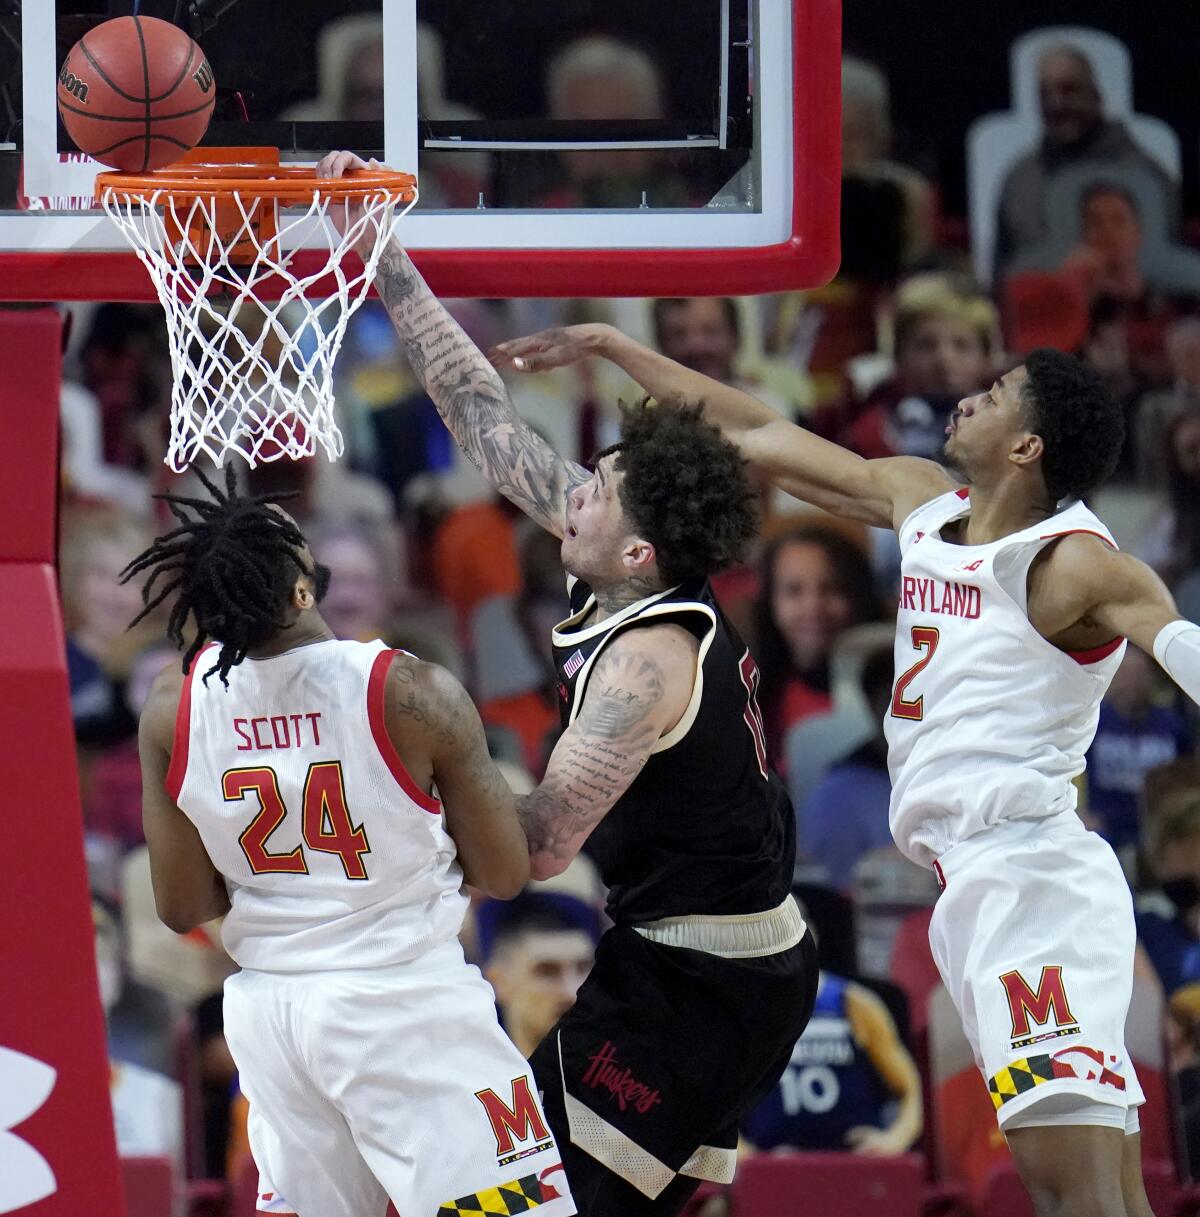 Nebraska guard Teddy Allen, center, goes up for a shot against Maryland forward Donta Scott, left, and guard Aaron Wiggins during the second half of an NCAA college basketball game, Tuesday, Feb. 16, 2021, in College Park, Md. Maryland won 64-50. (AP Photo/Julio Cortez)